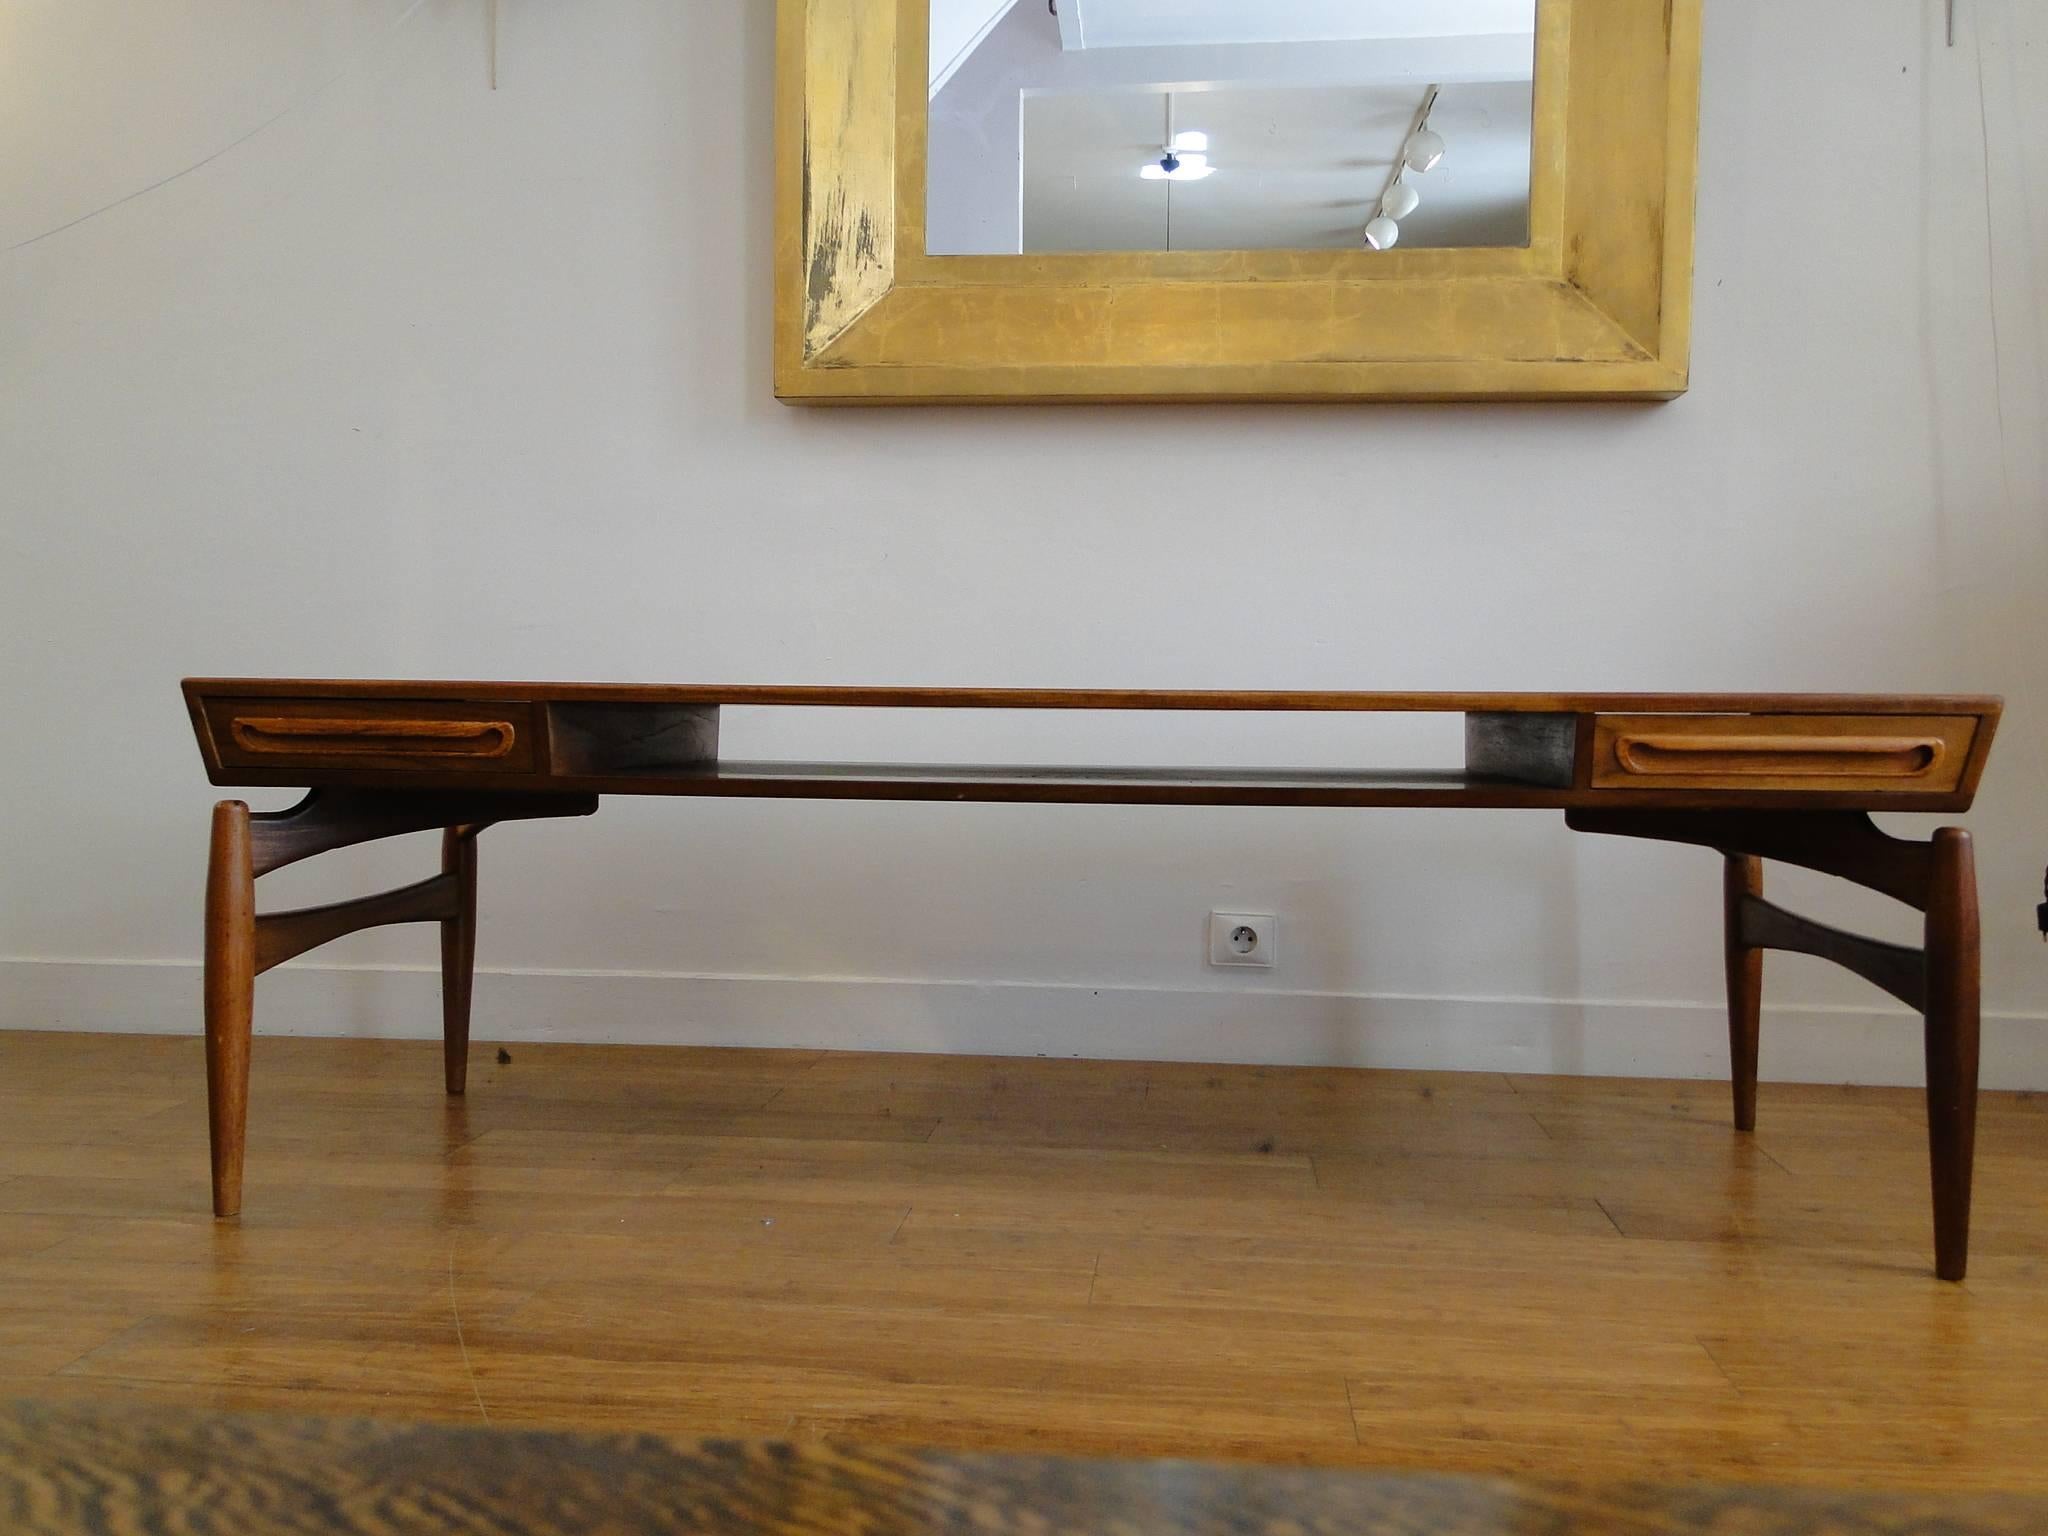 Vintage 1950s E.W. Bach coffee table

This Danish coffee table is a sculptural masterpieces. Shelves and drawers that open to both sides make the perfect coffee table. Ready for pick up, delivery, or shipping anywhere in the world.